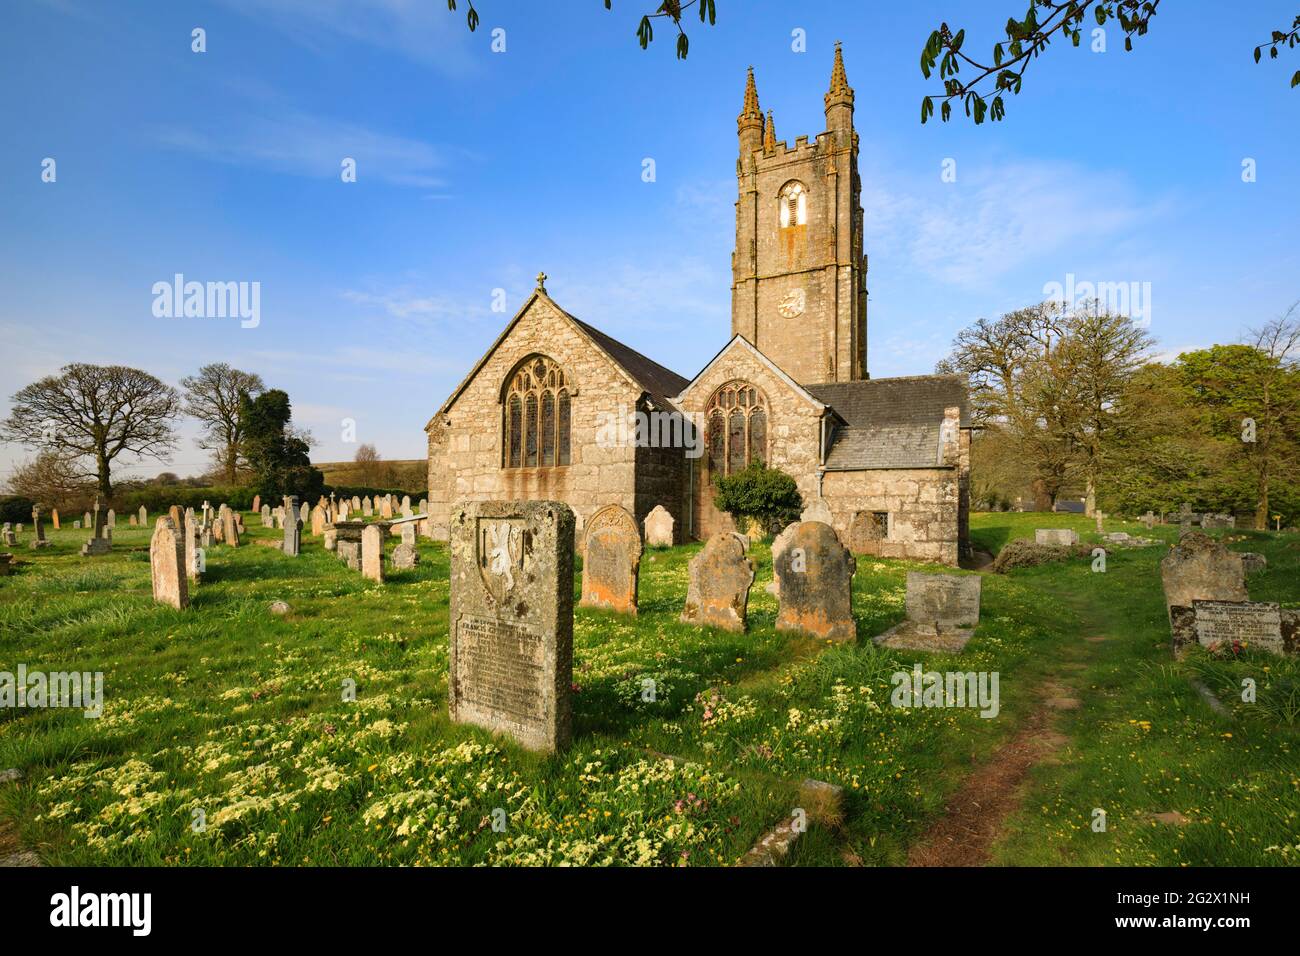 The churchyard at Widecombe-in-the-moor in the Dartmoor National Park, Devon. Stock Photo